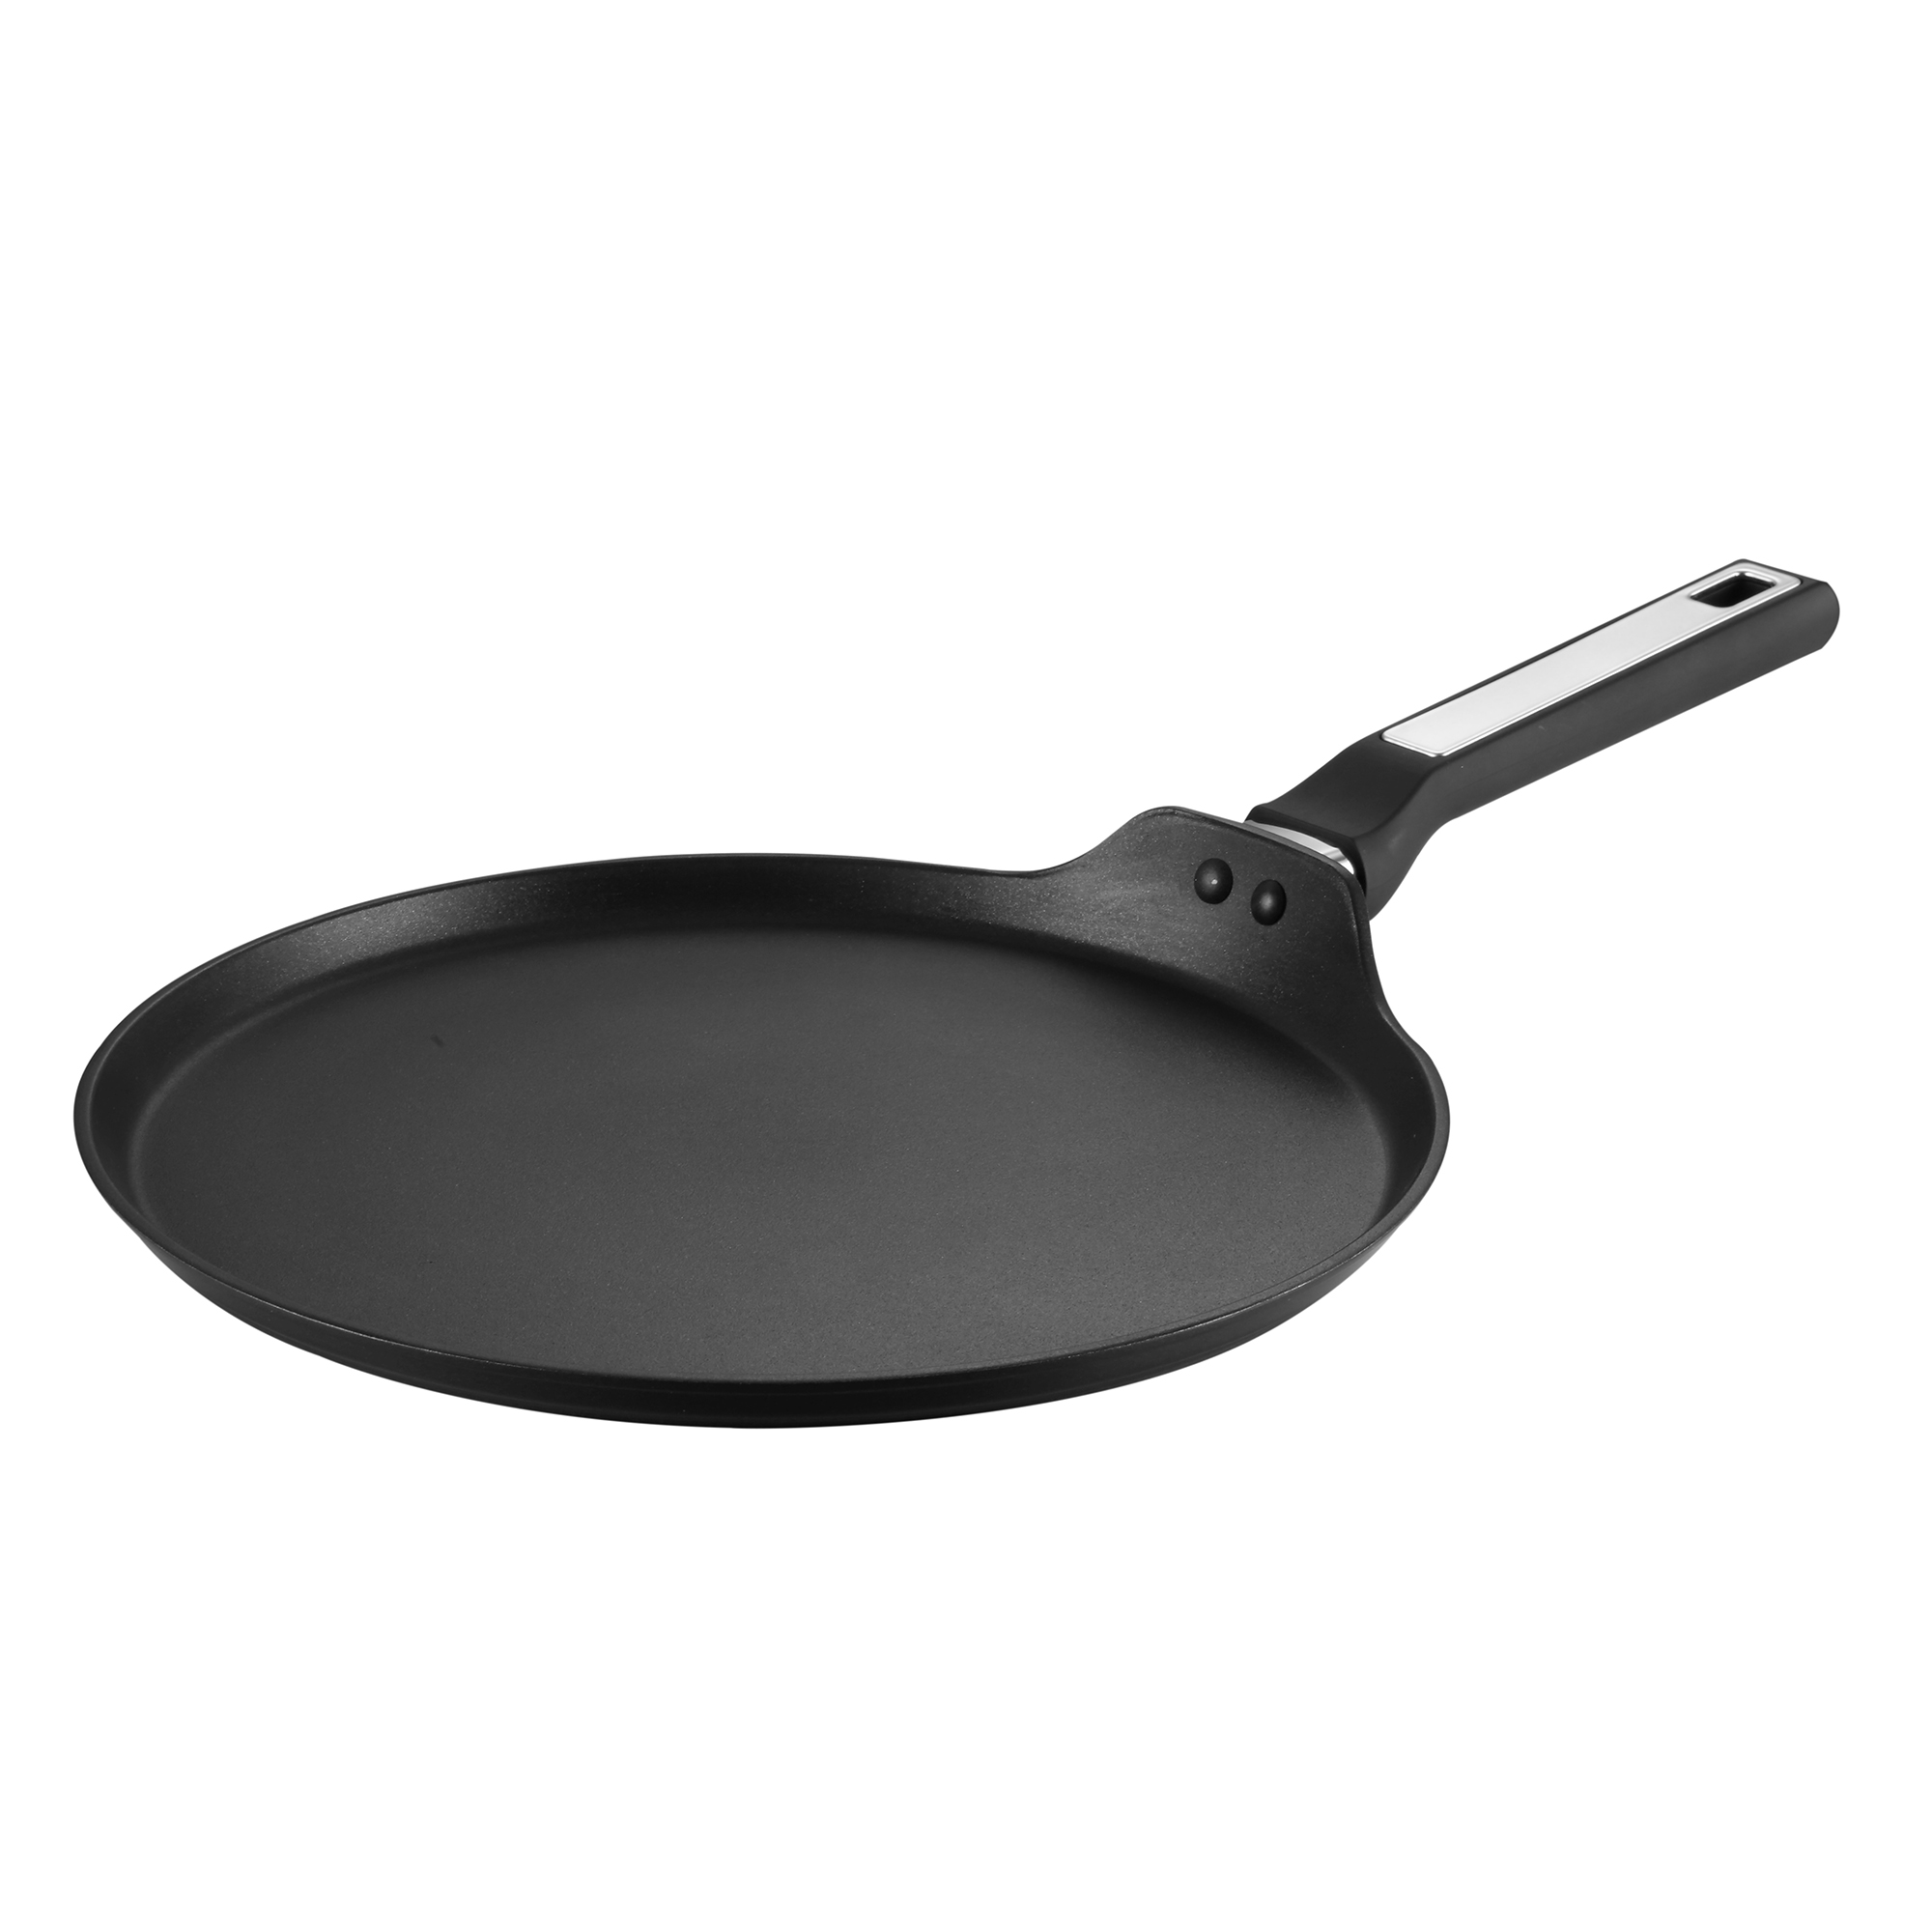 Warrior Range Non-stick Cookware Aluminum Forged Crepe Pan